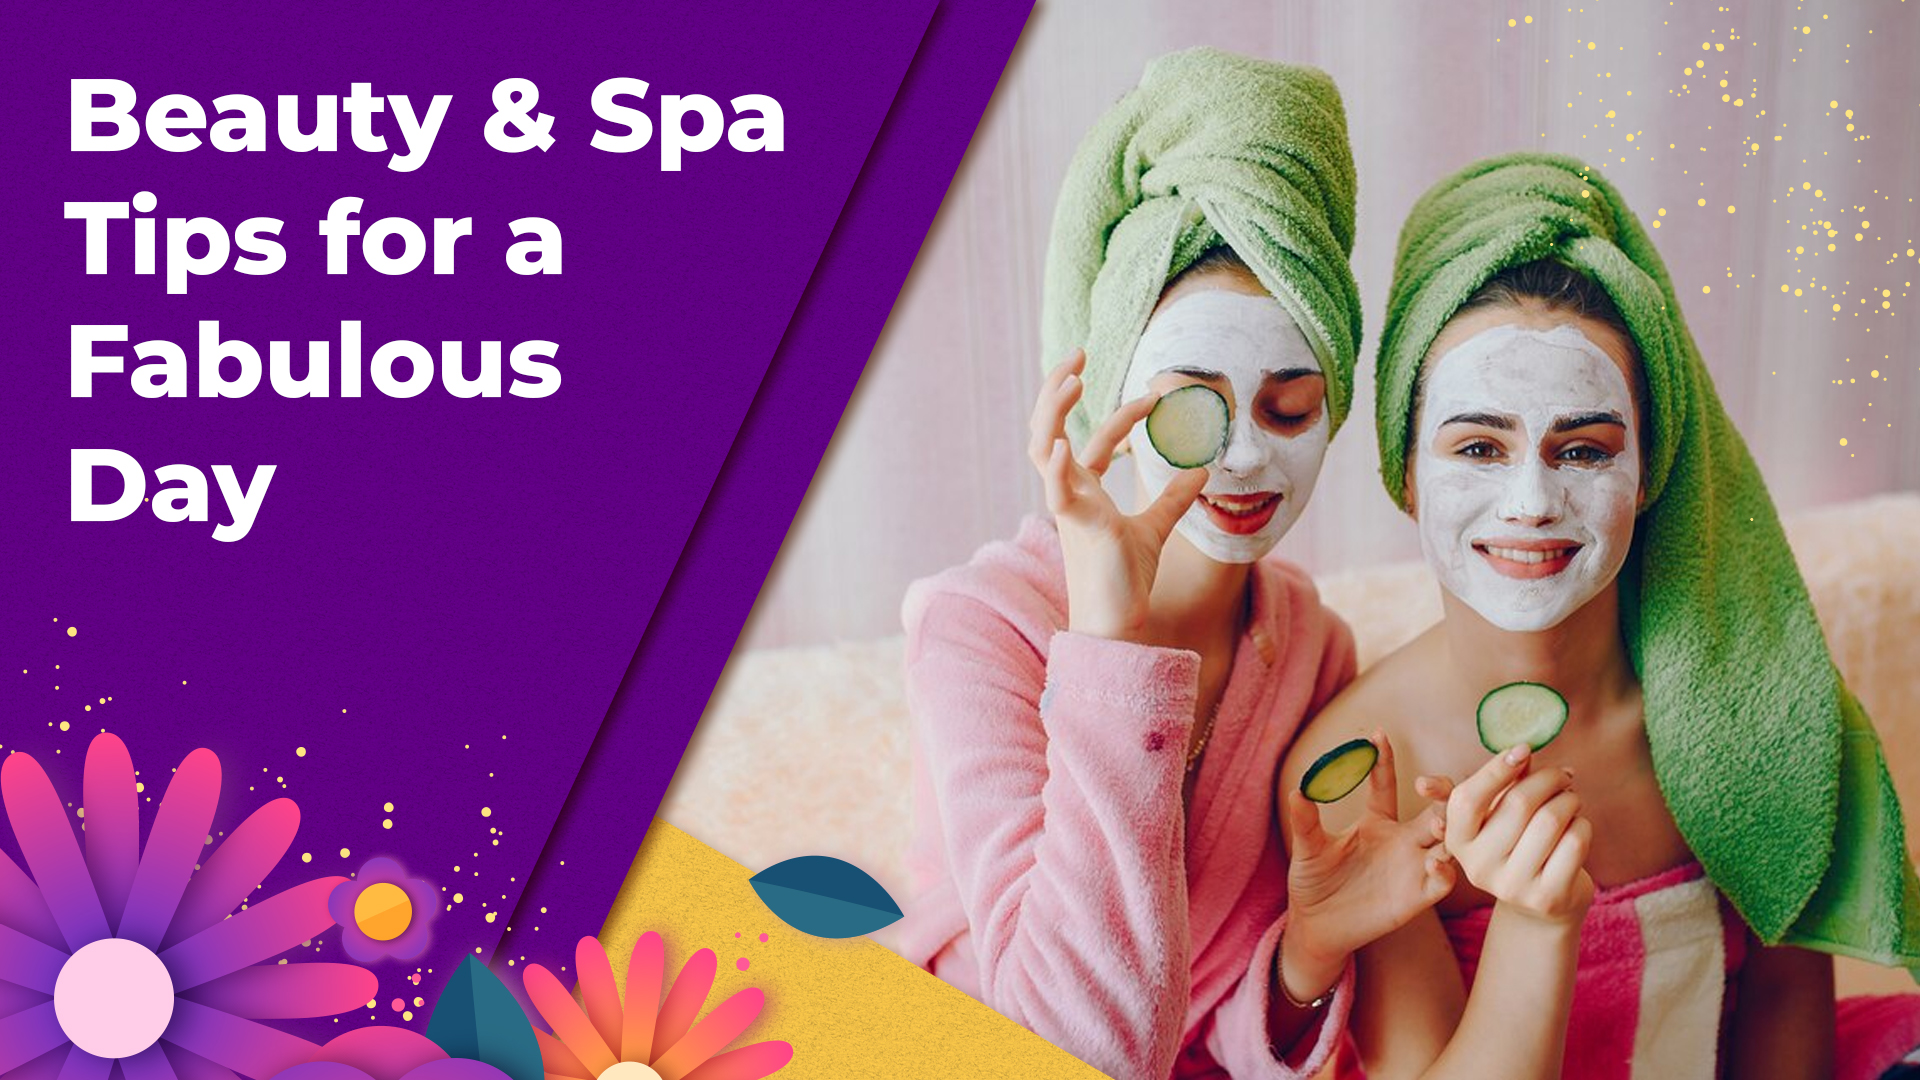 Beauty & Spa Tips For A Fabulous Day